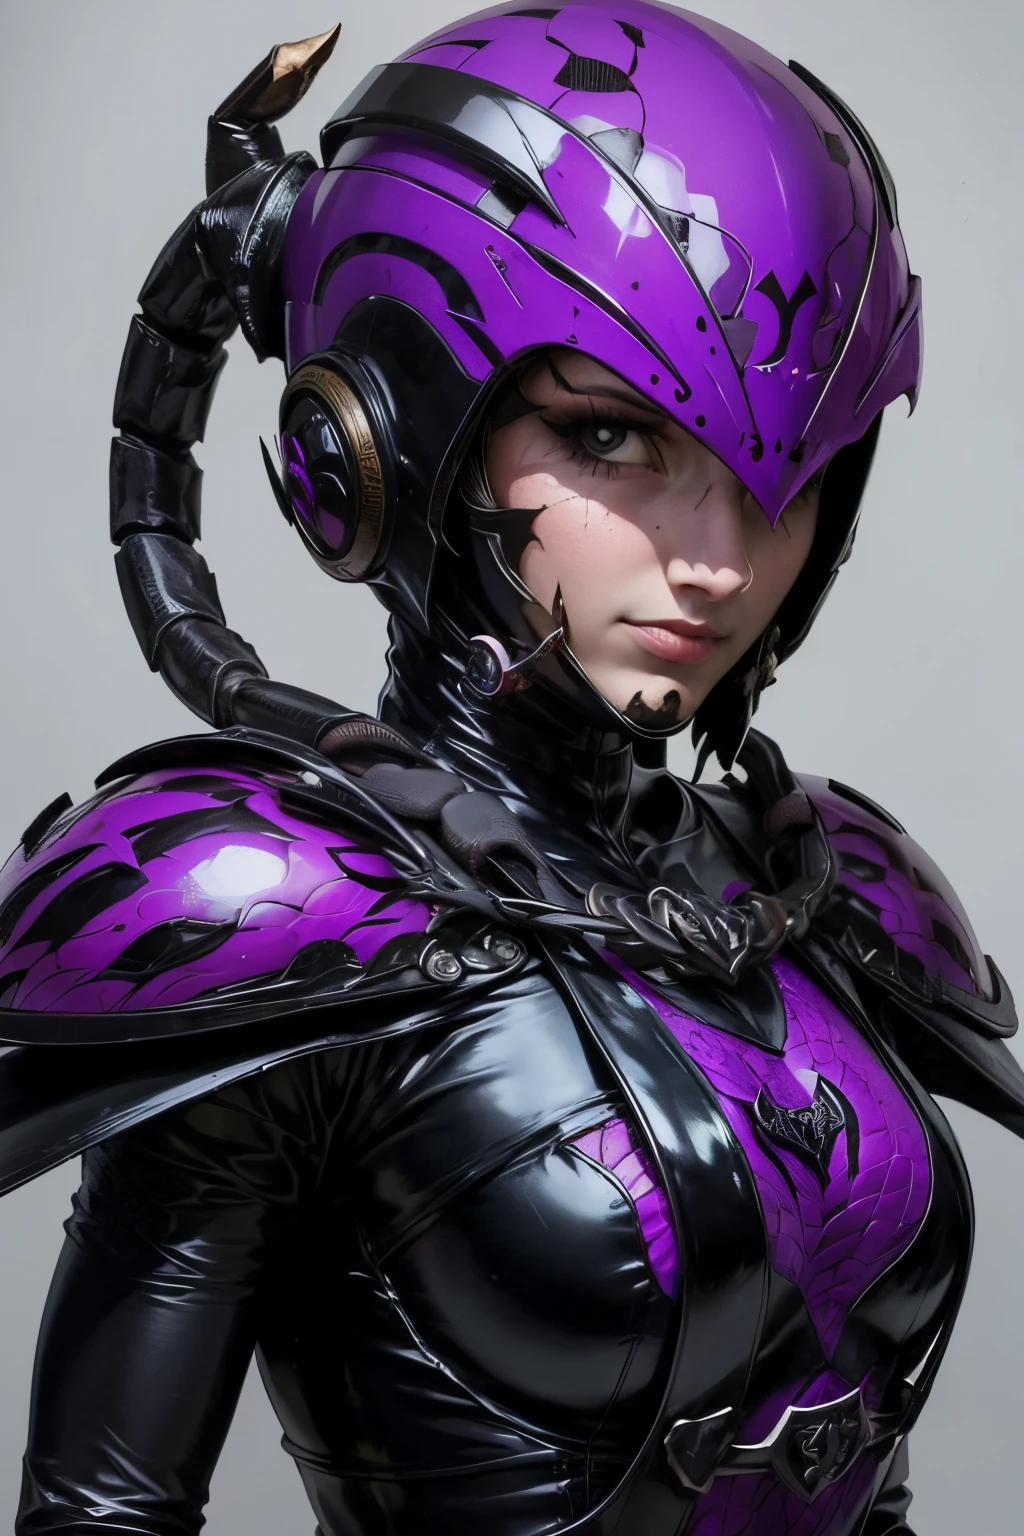 A helmet with a scorpion motif. woman. She is wearing a black latex suit. Striking decoration.chain and sickle. Alchemy style equipment. Her image color is purple.